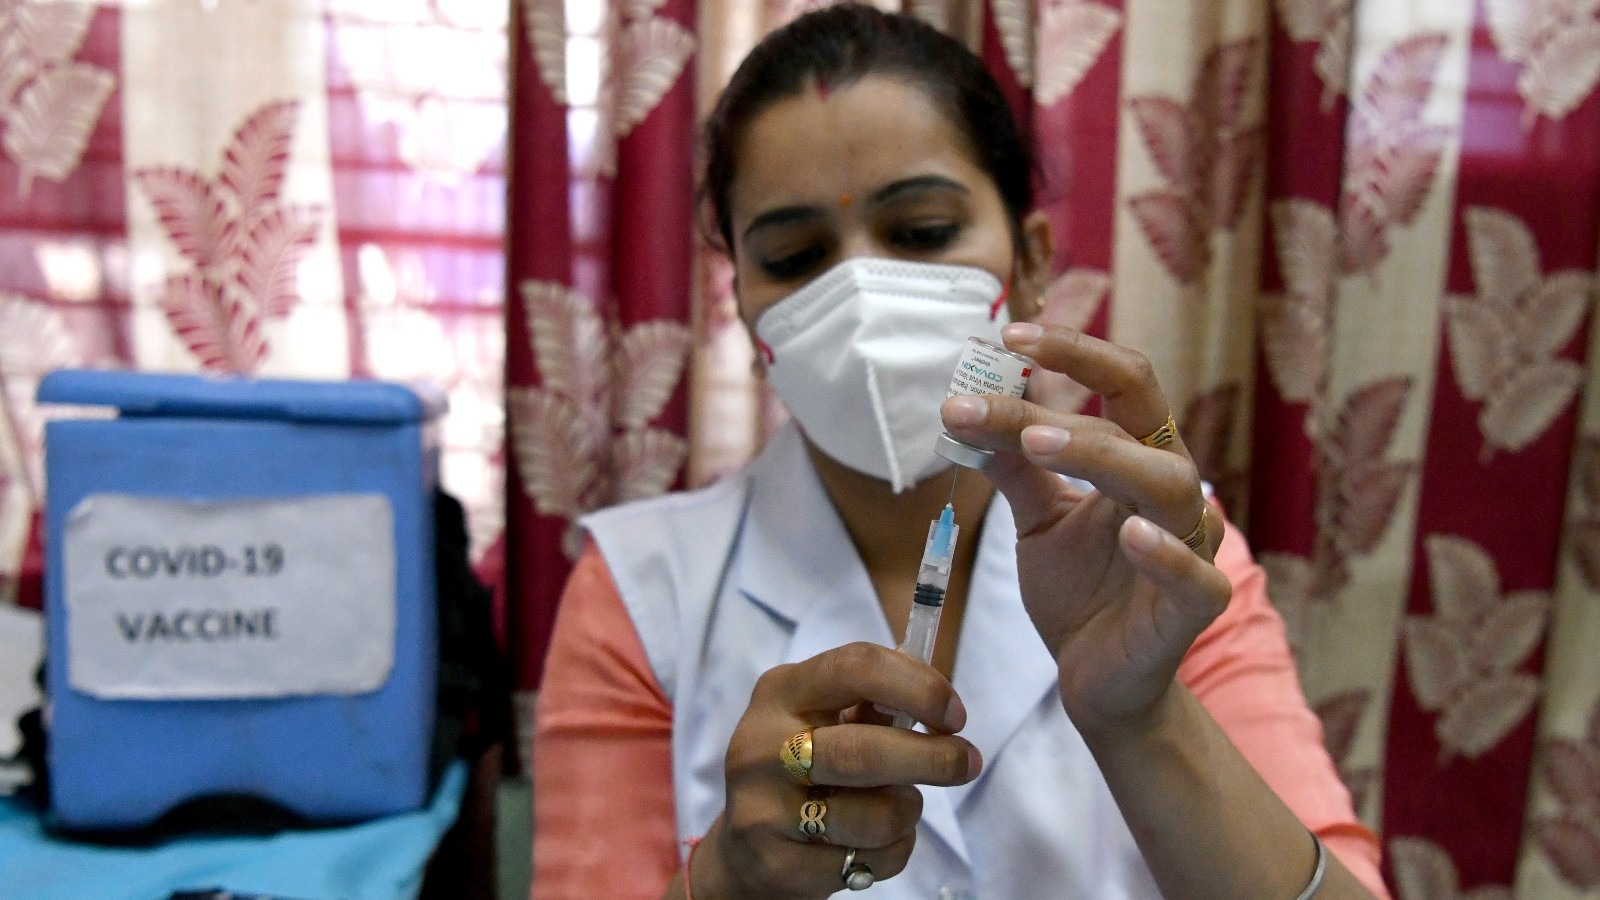 A healthcare worker in India holds a COVID-19 vaccine.